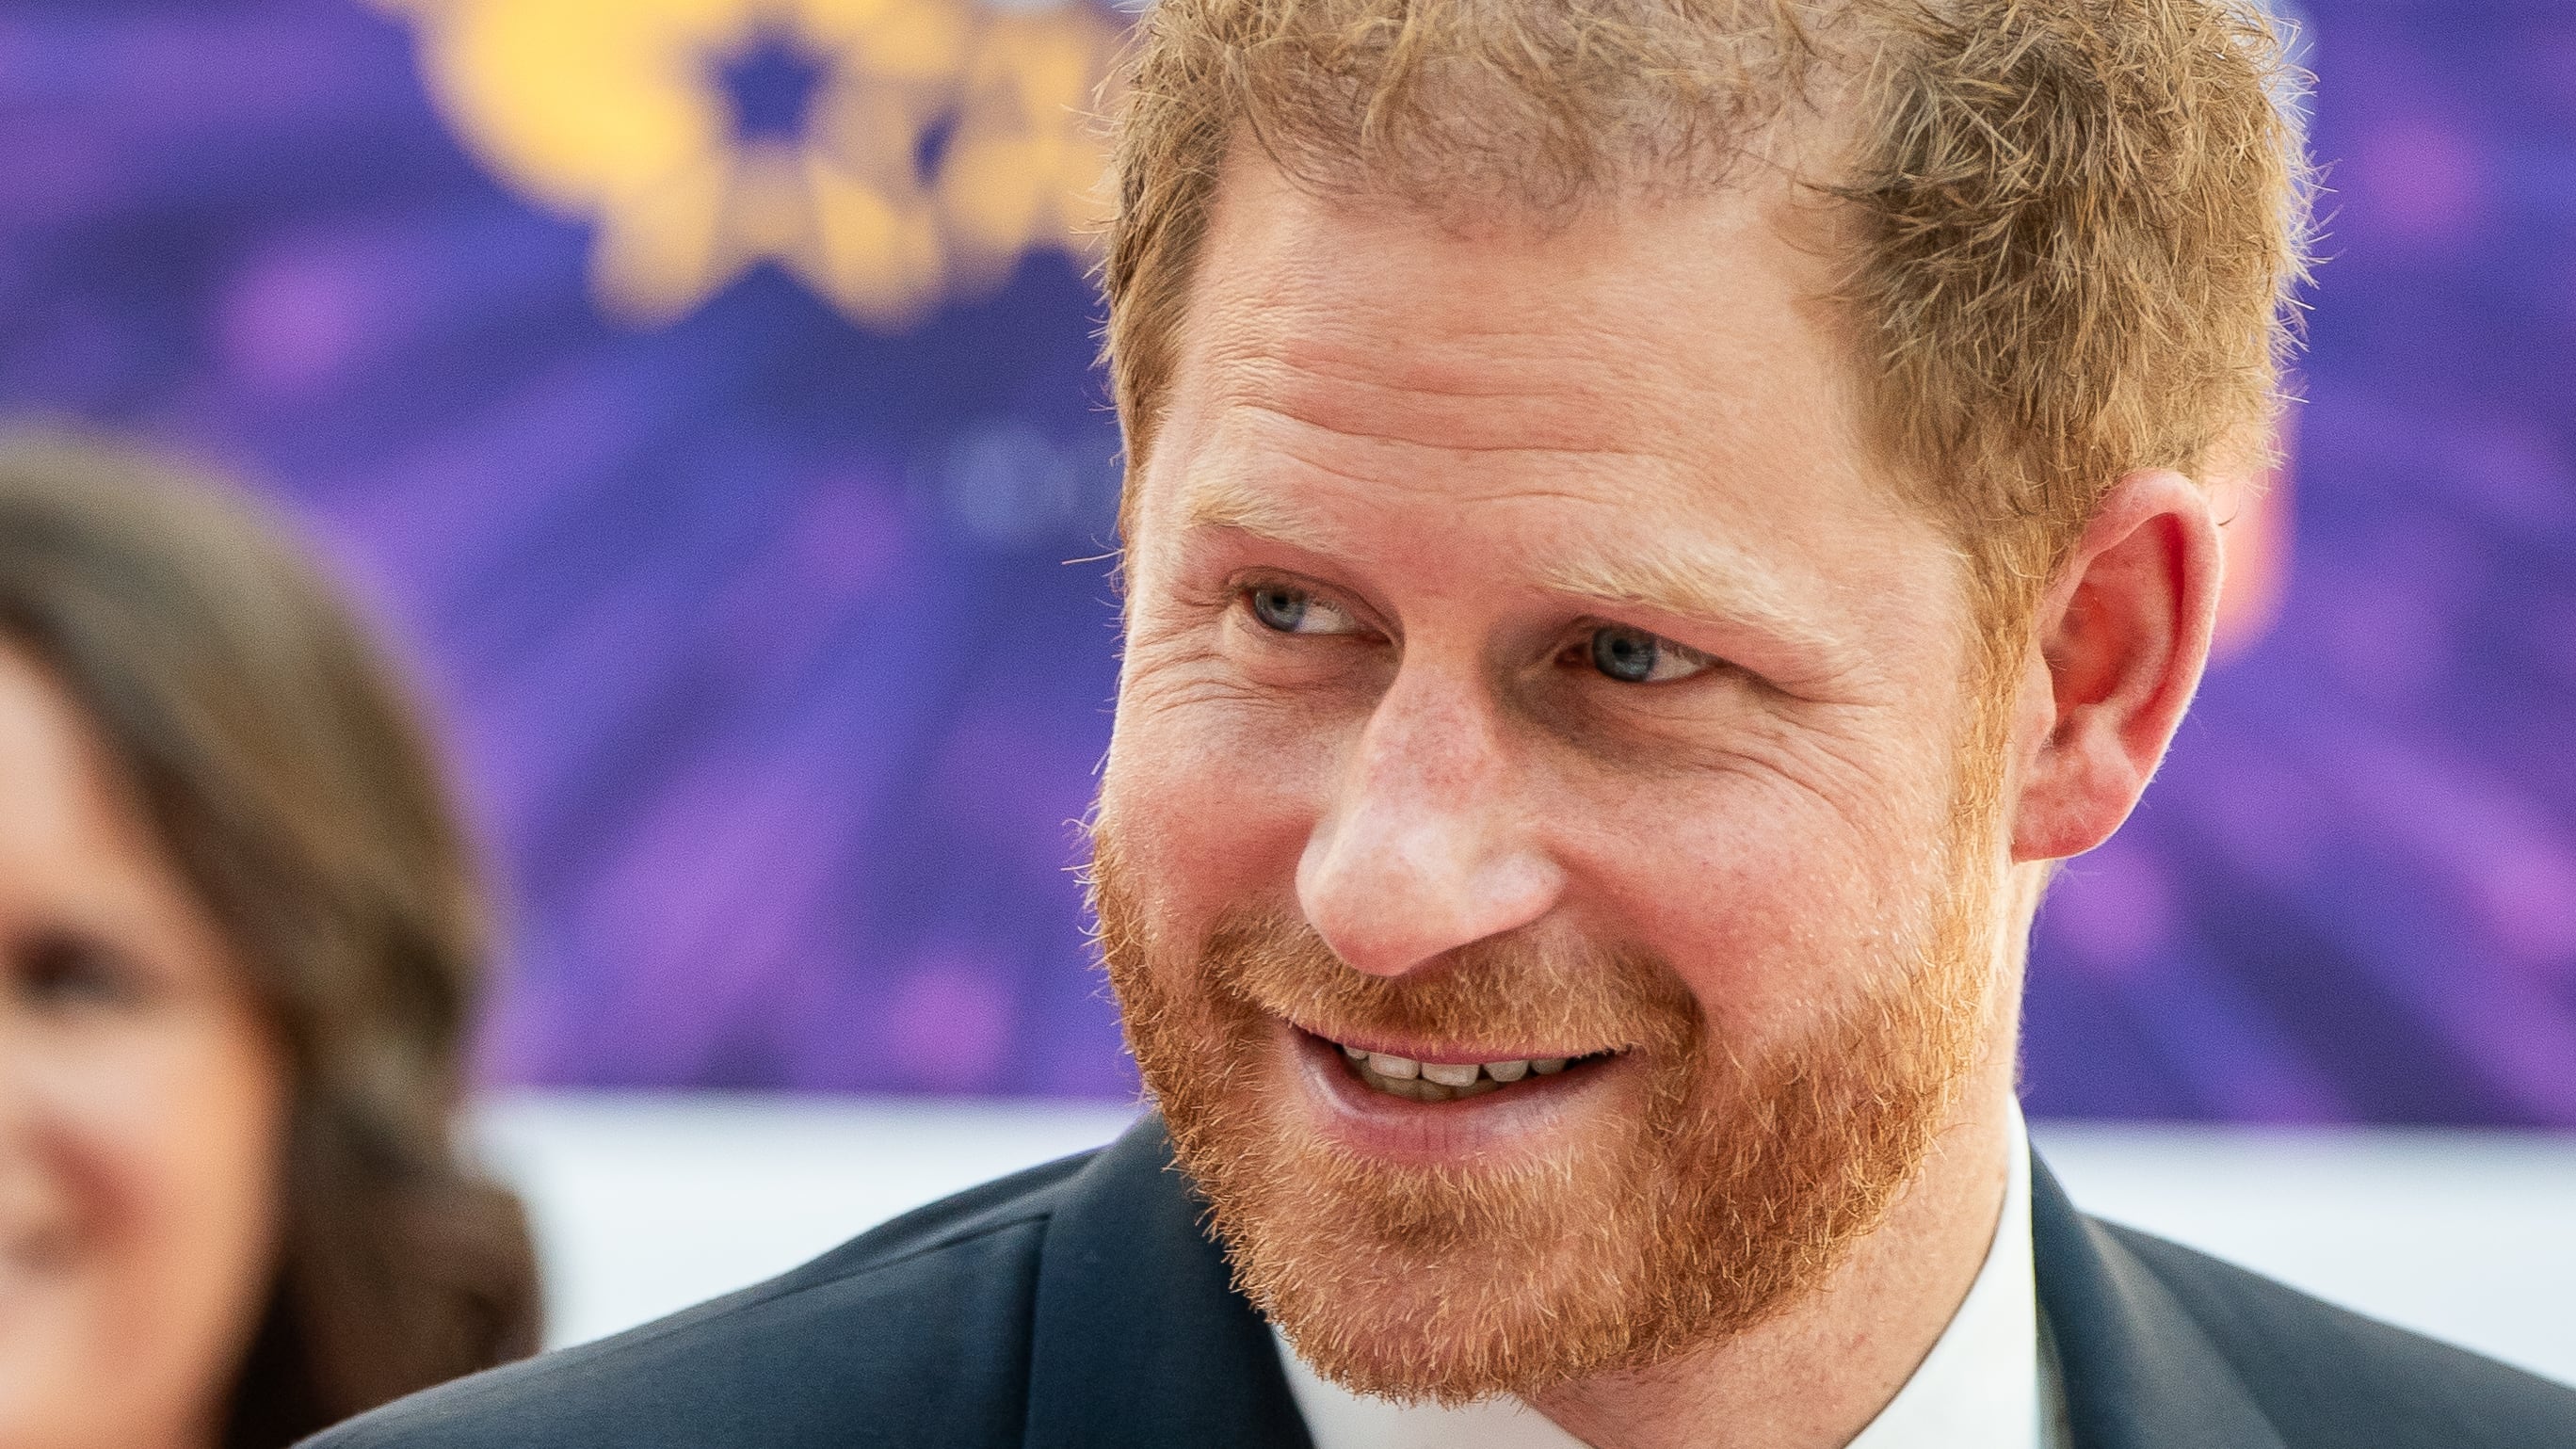 Duke of Sussex’s Spare made the front pages